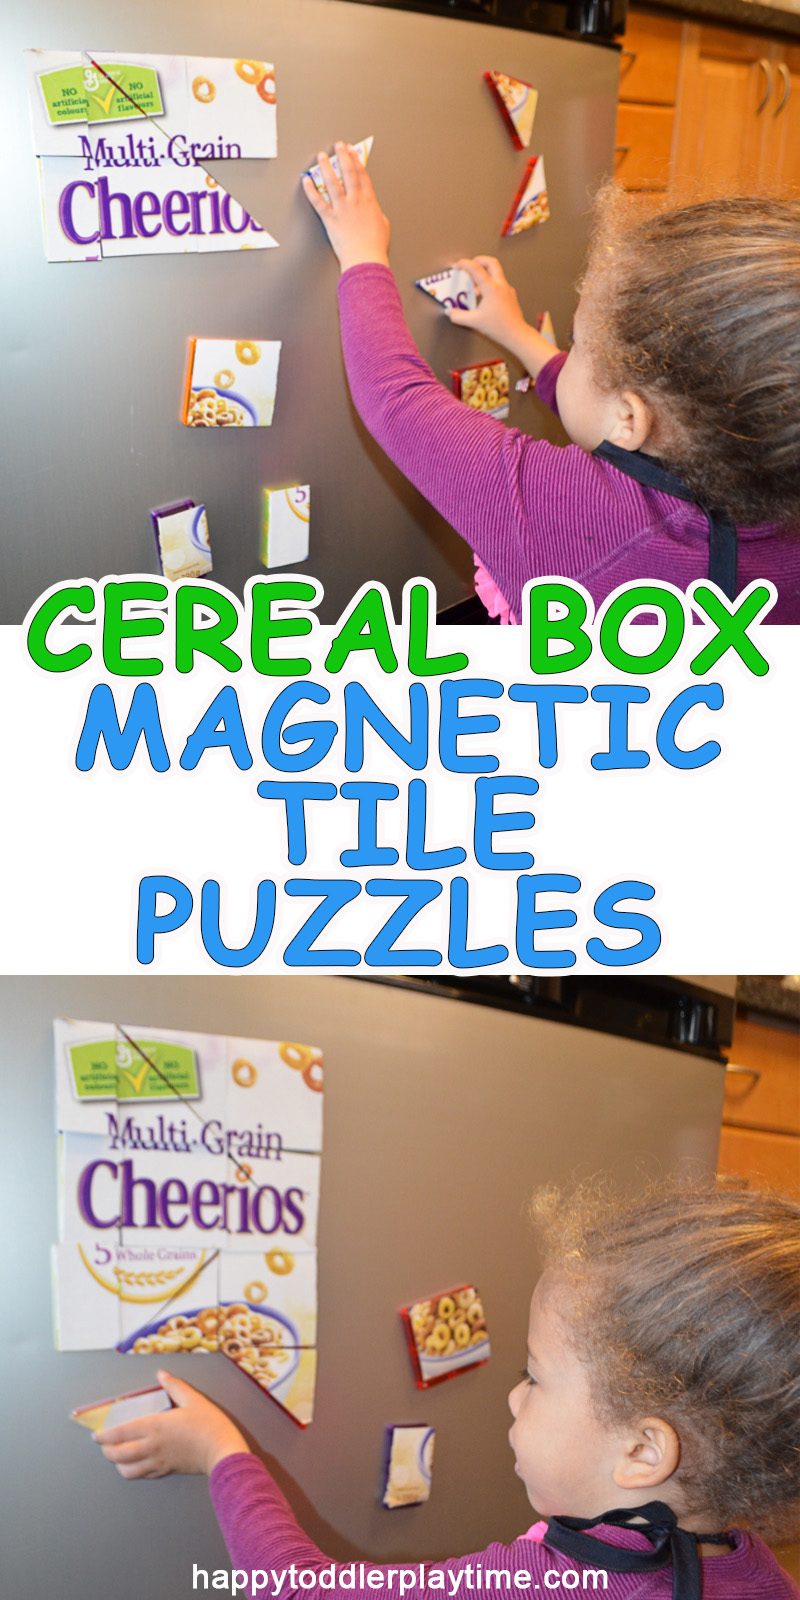 MAGNETICTILECEREALBOXPUZZLESpin1